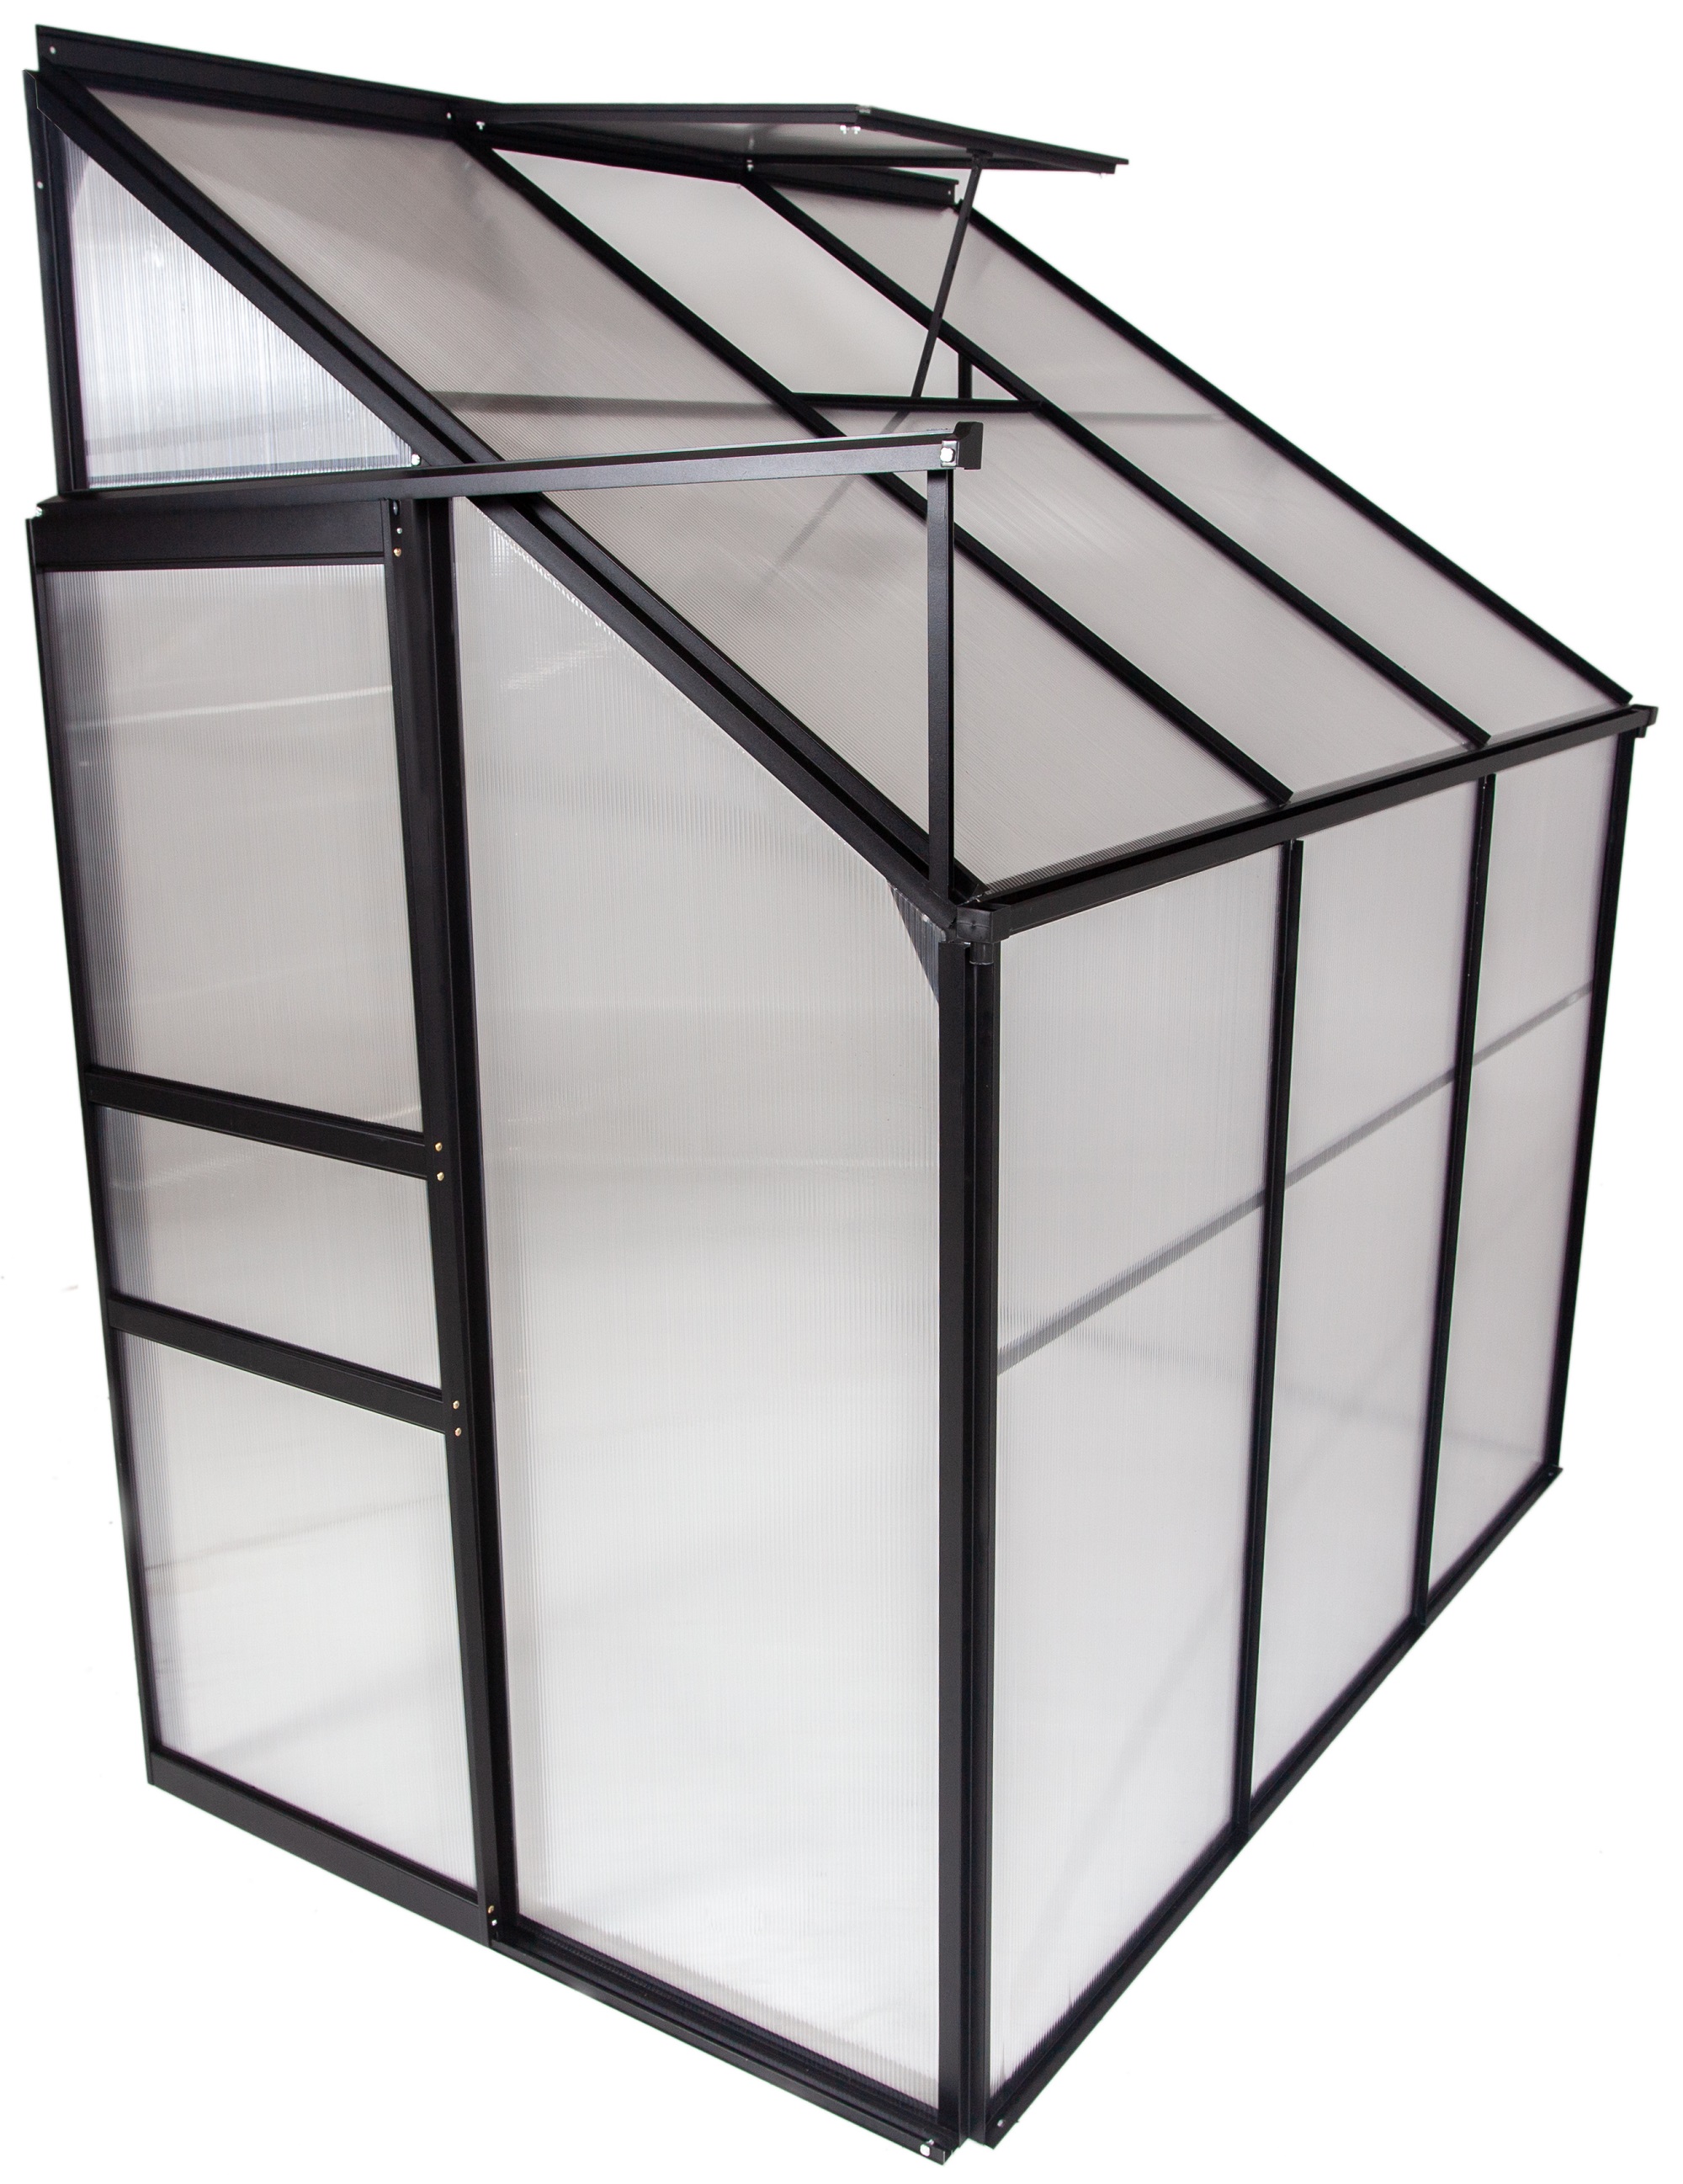 Machrus Ogrow 4 x 6 FT Lean-To-Wall Walk-In Greenhouse with Sliding Door and Adjustable Roof Vent - image 1 of 7